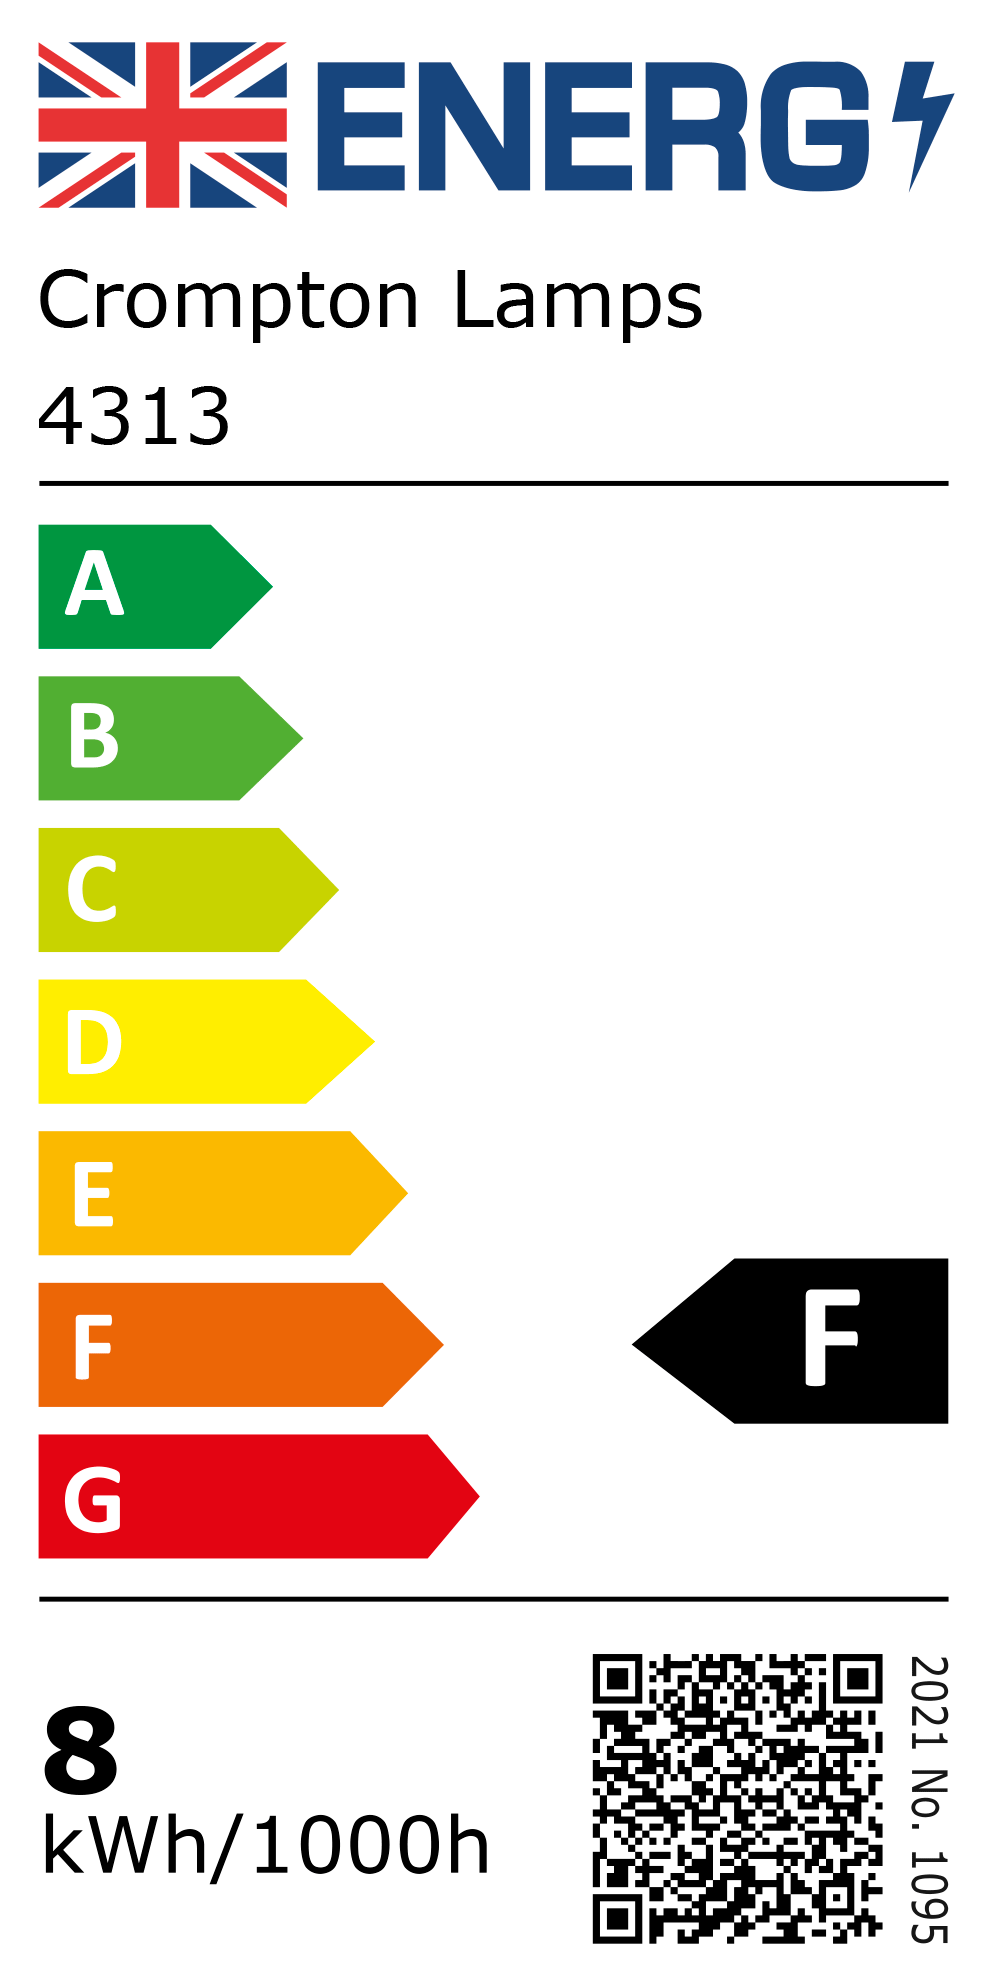 New 2021 Energy Rating Label: Stock Code 4313